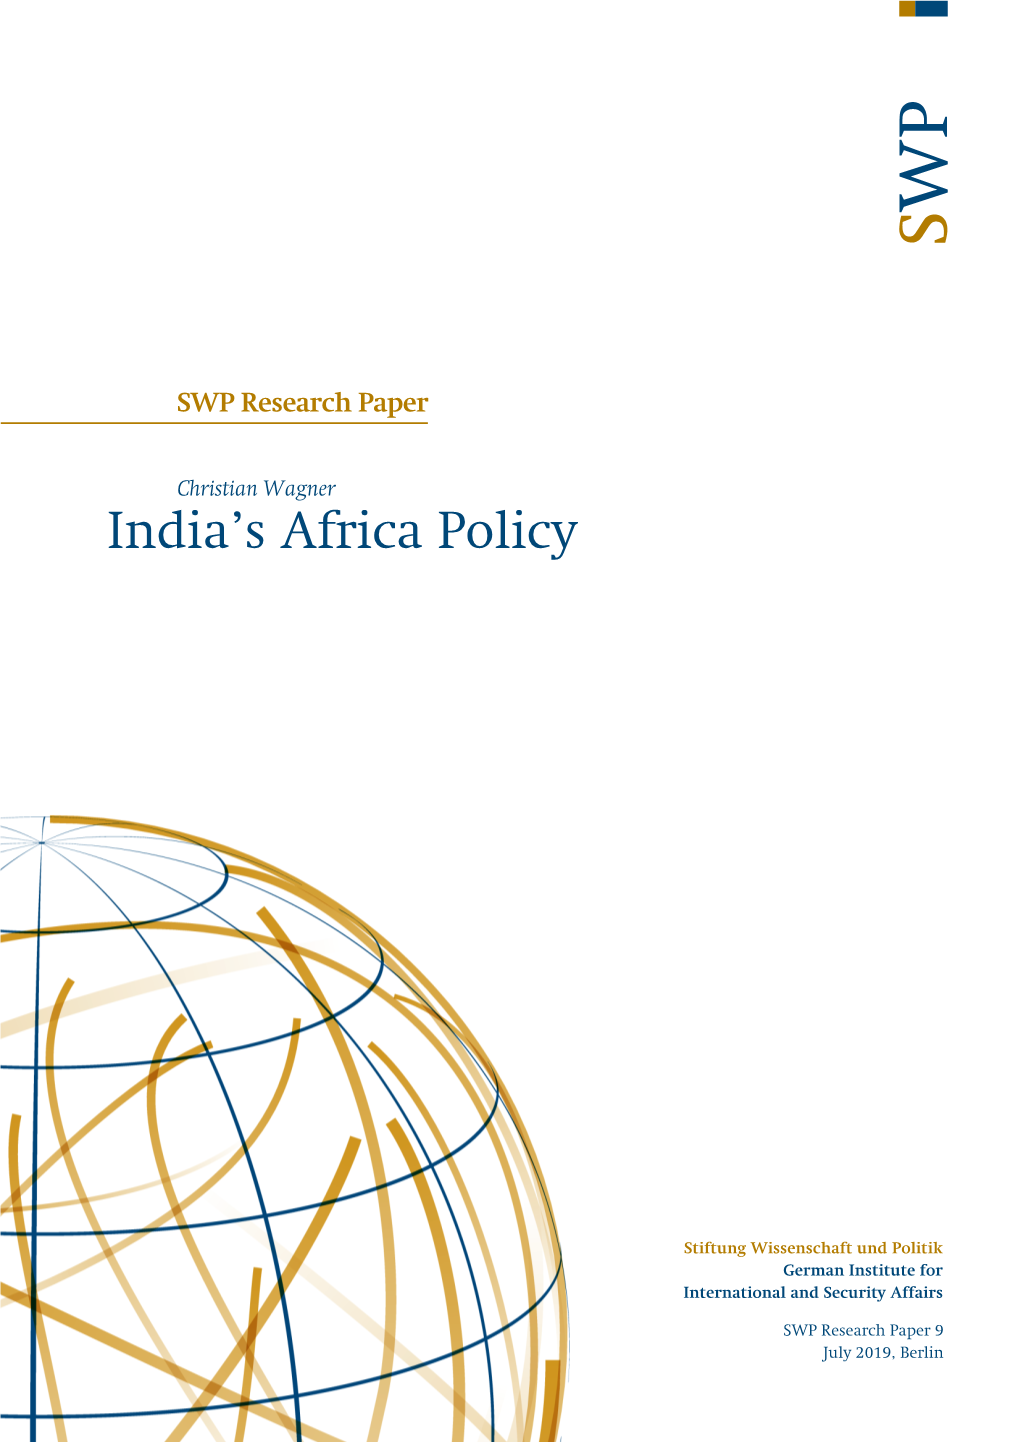 India's Africa Policy